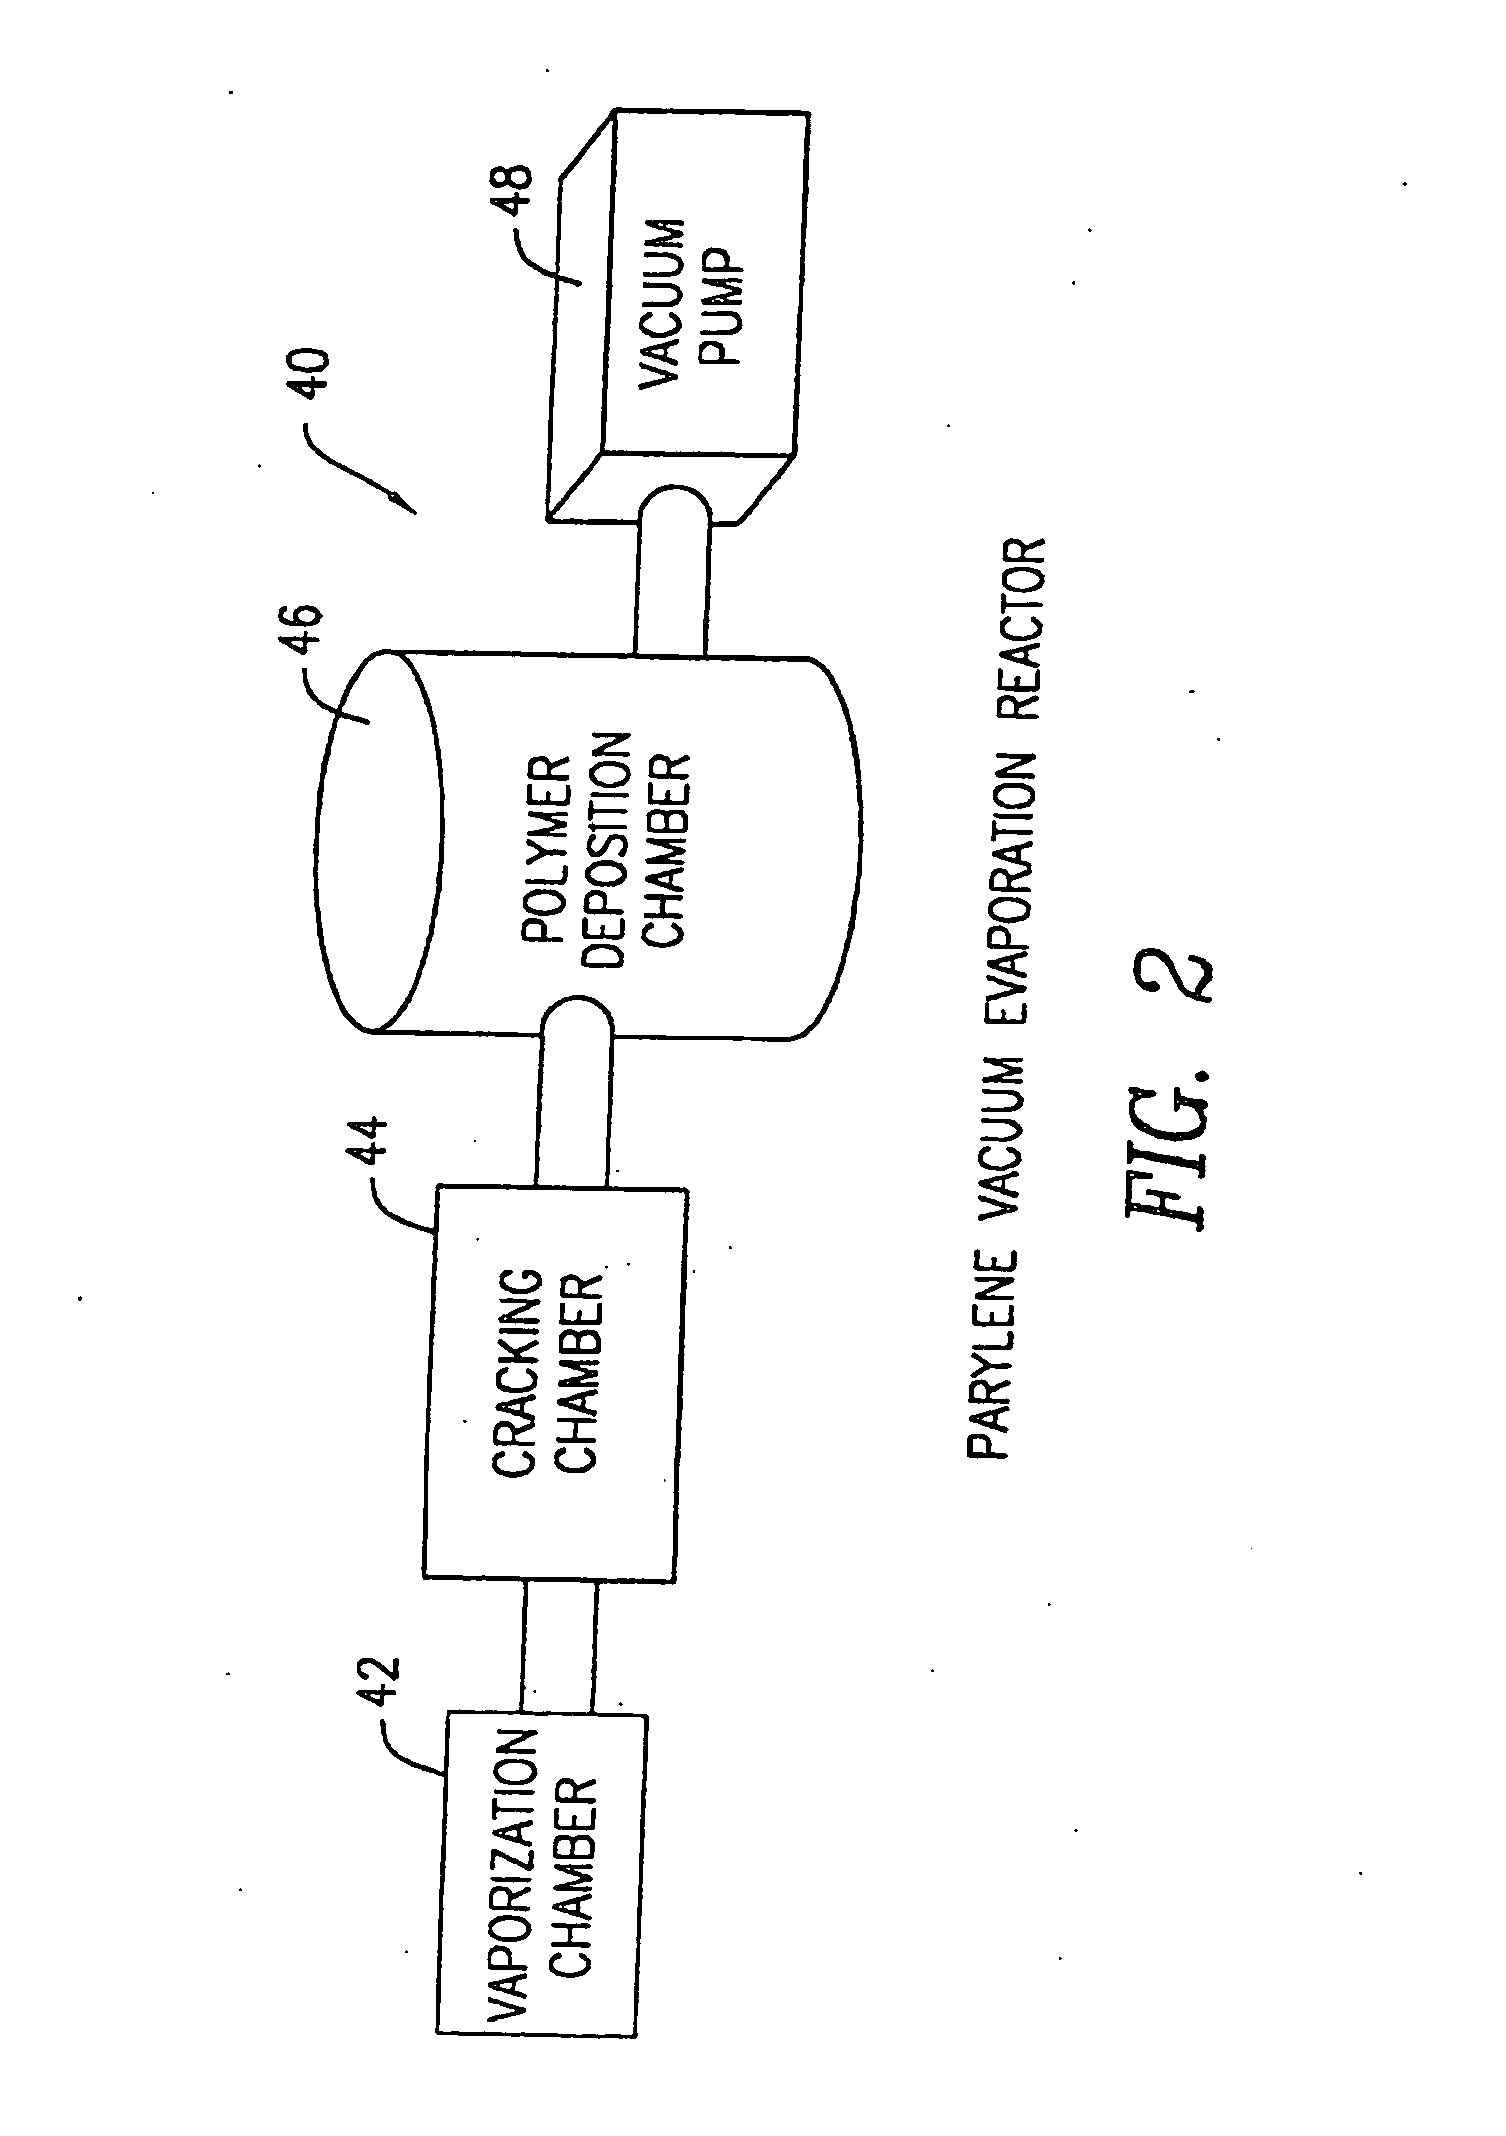 Barrier coating composition for a substrate